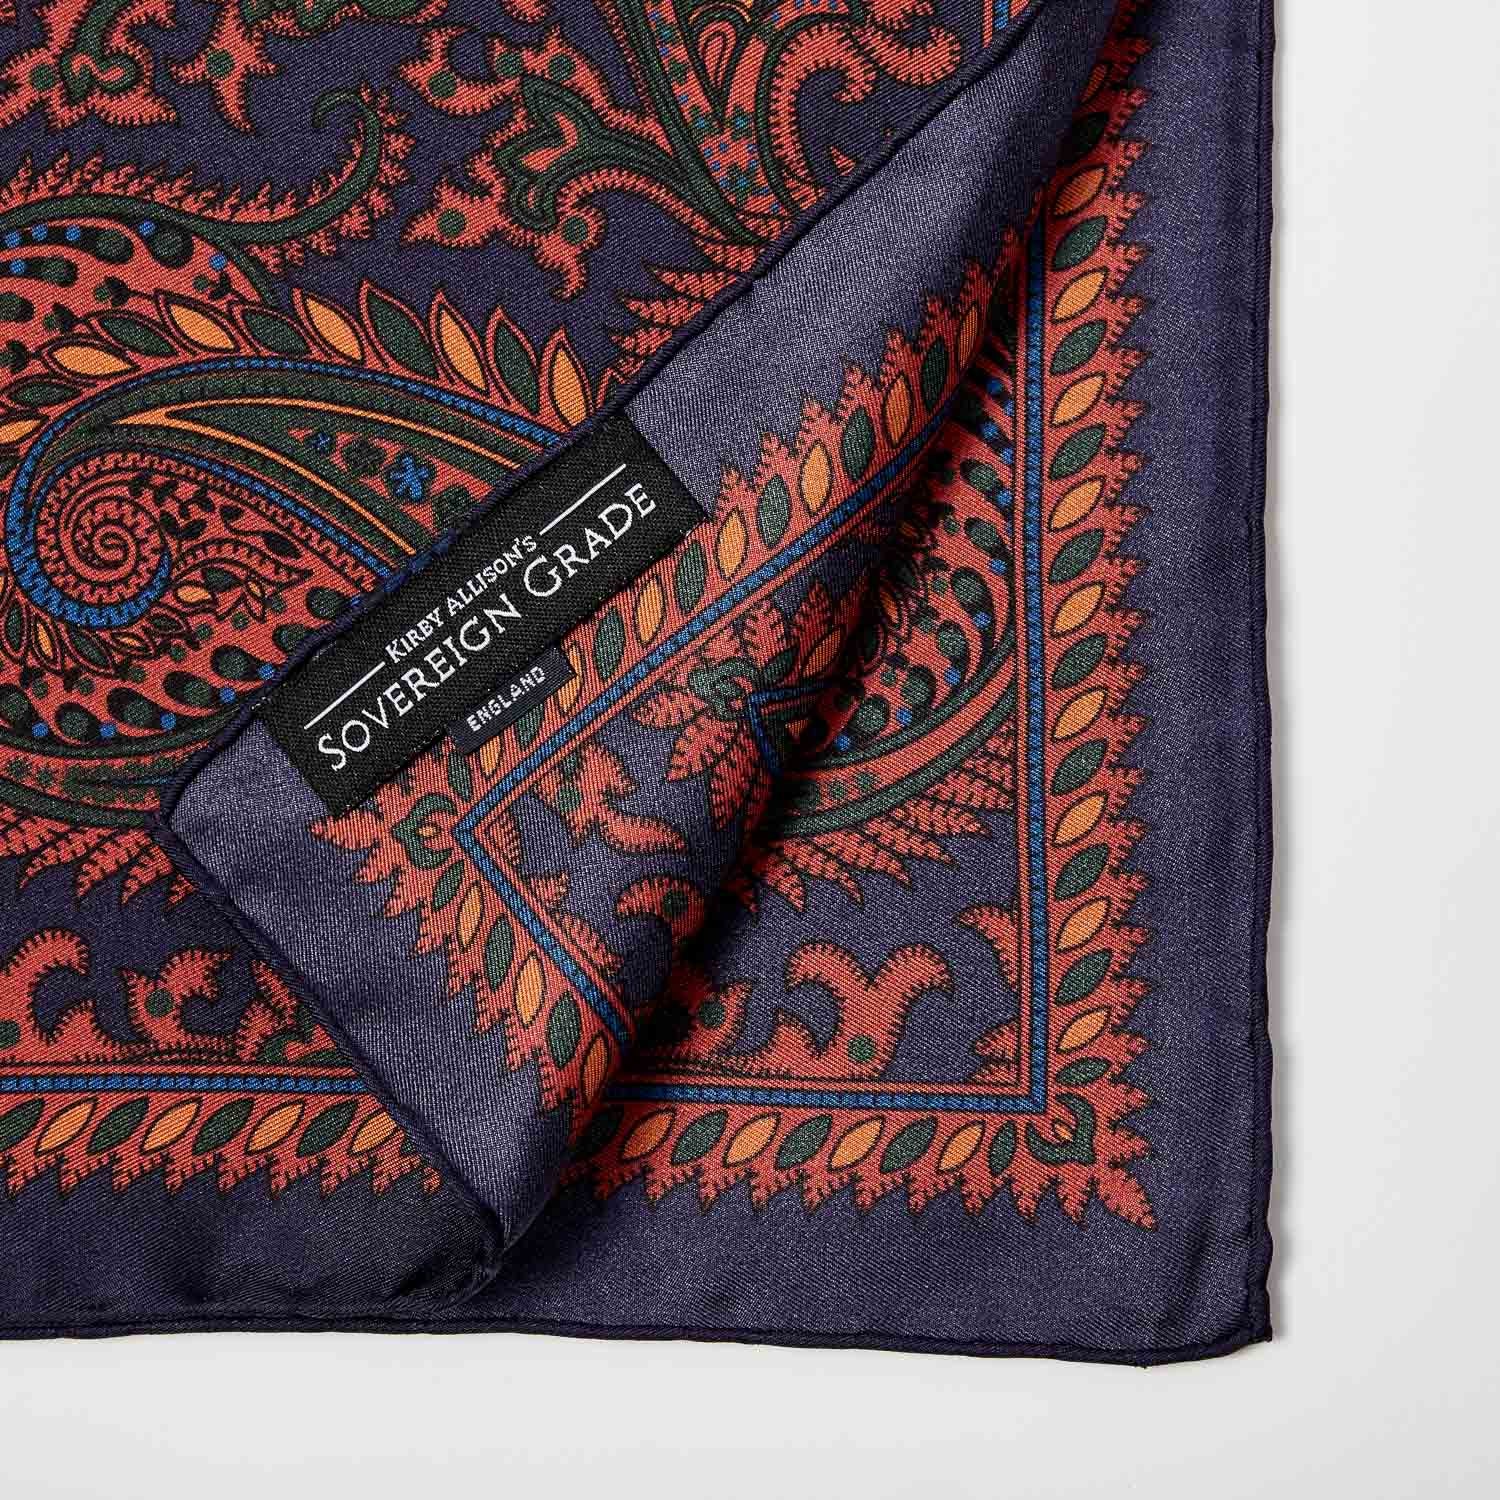 A formal Sovereign Grade 100% Silk Navy Pocket Square from KirbyAllison.com that complements any outfit.